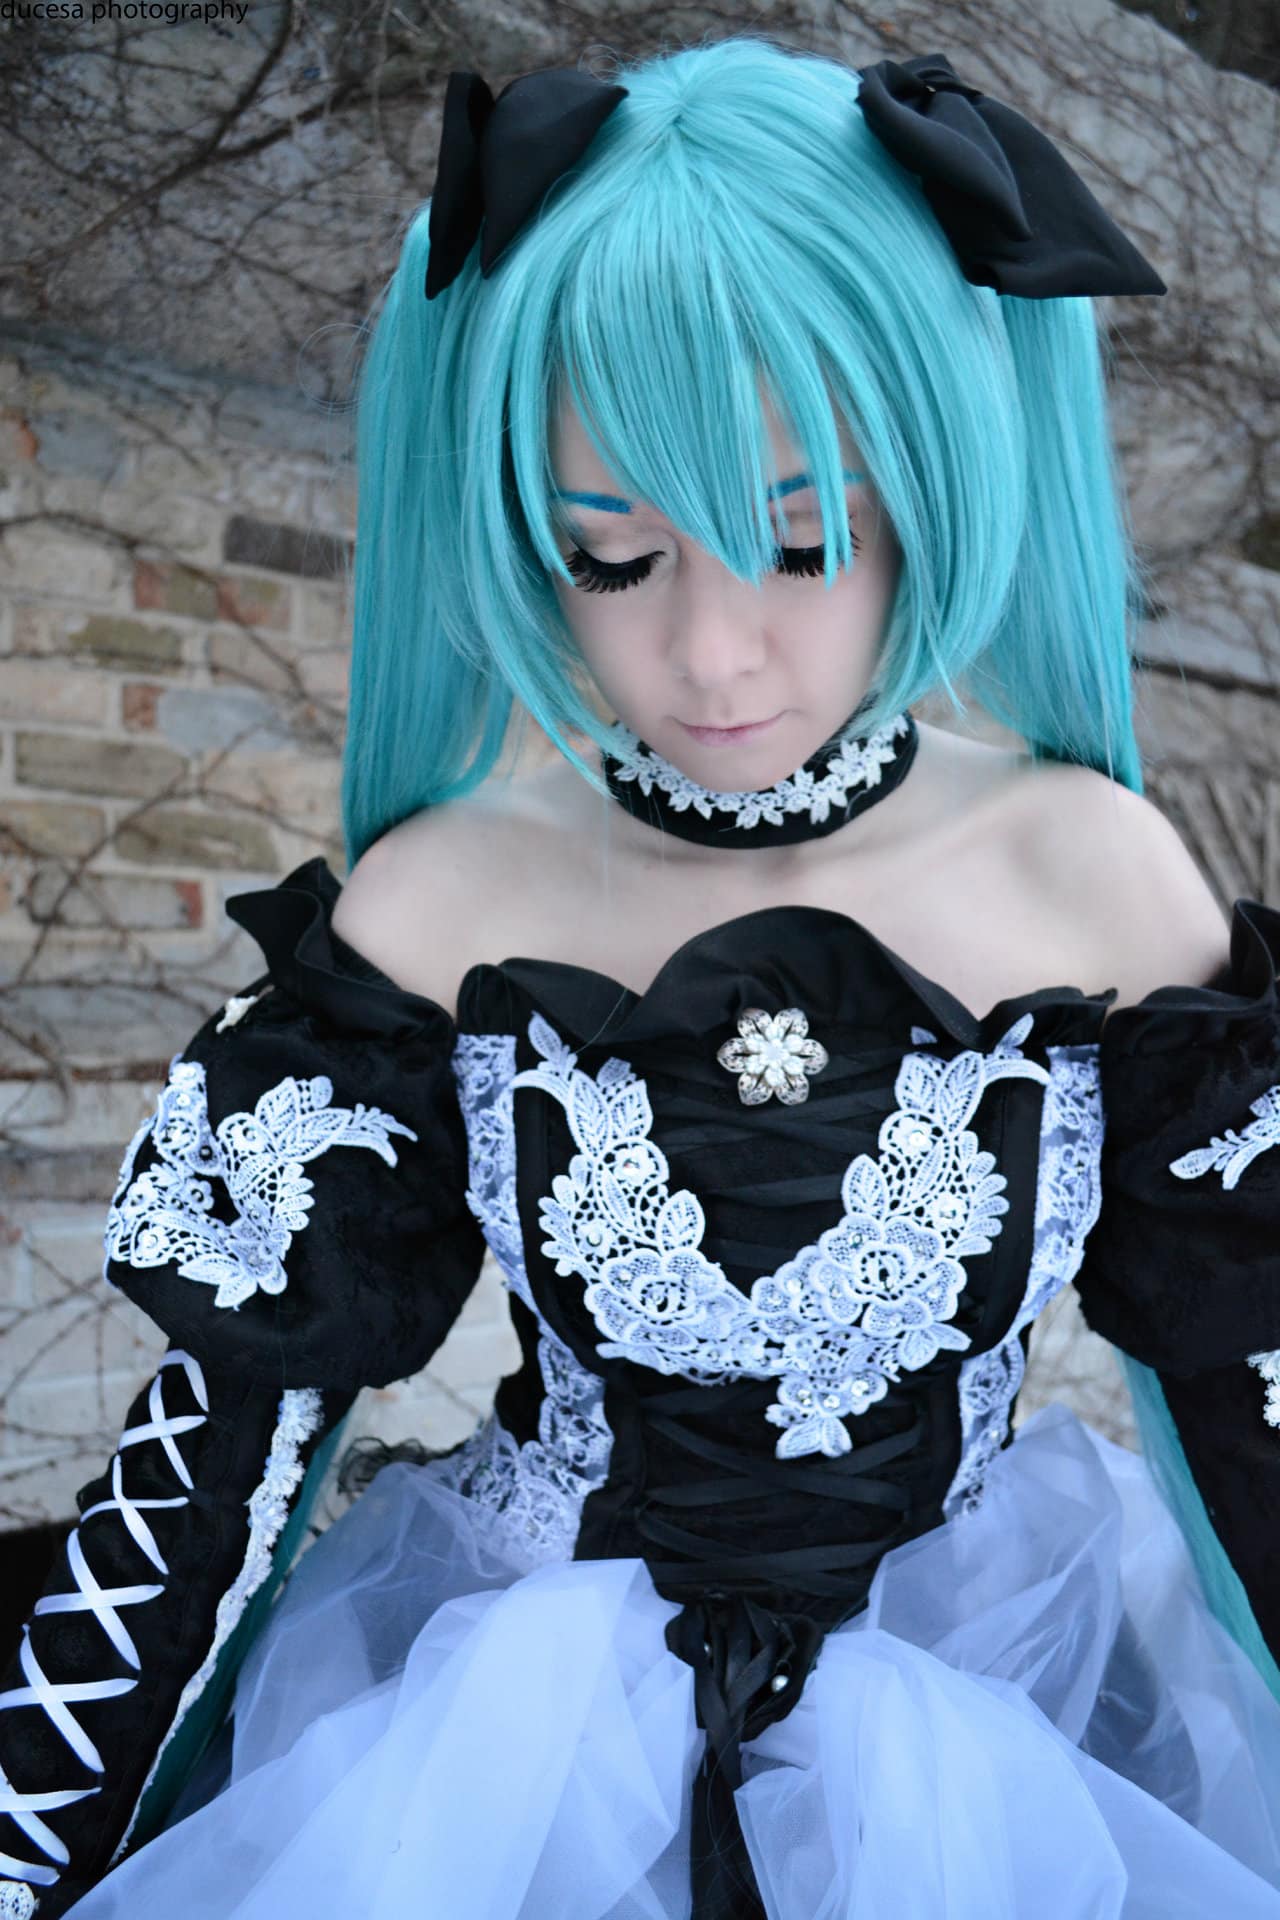 Miku Cosplay Somber Tones Starring TraumaticCandy by Ducesa DminorChrystalis